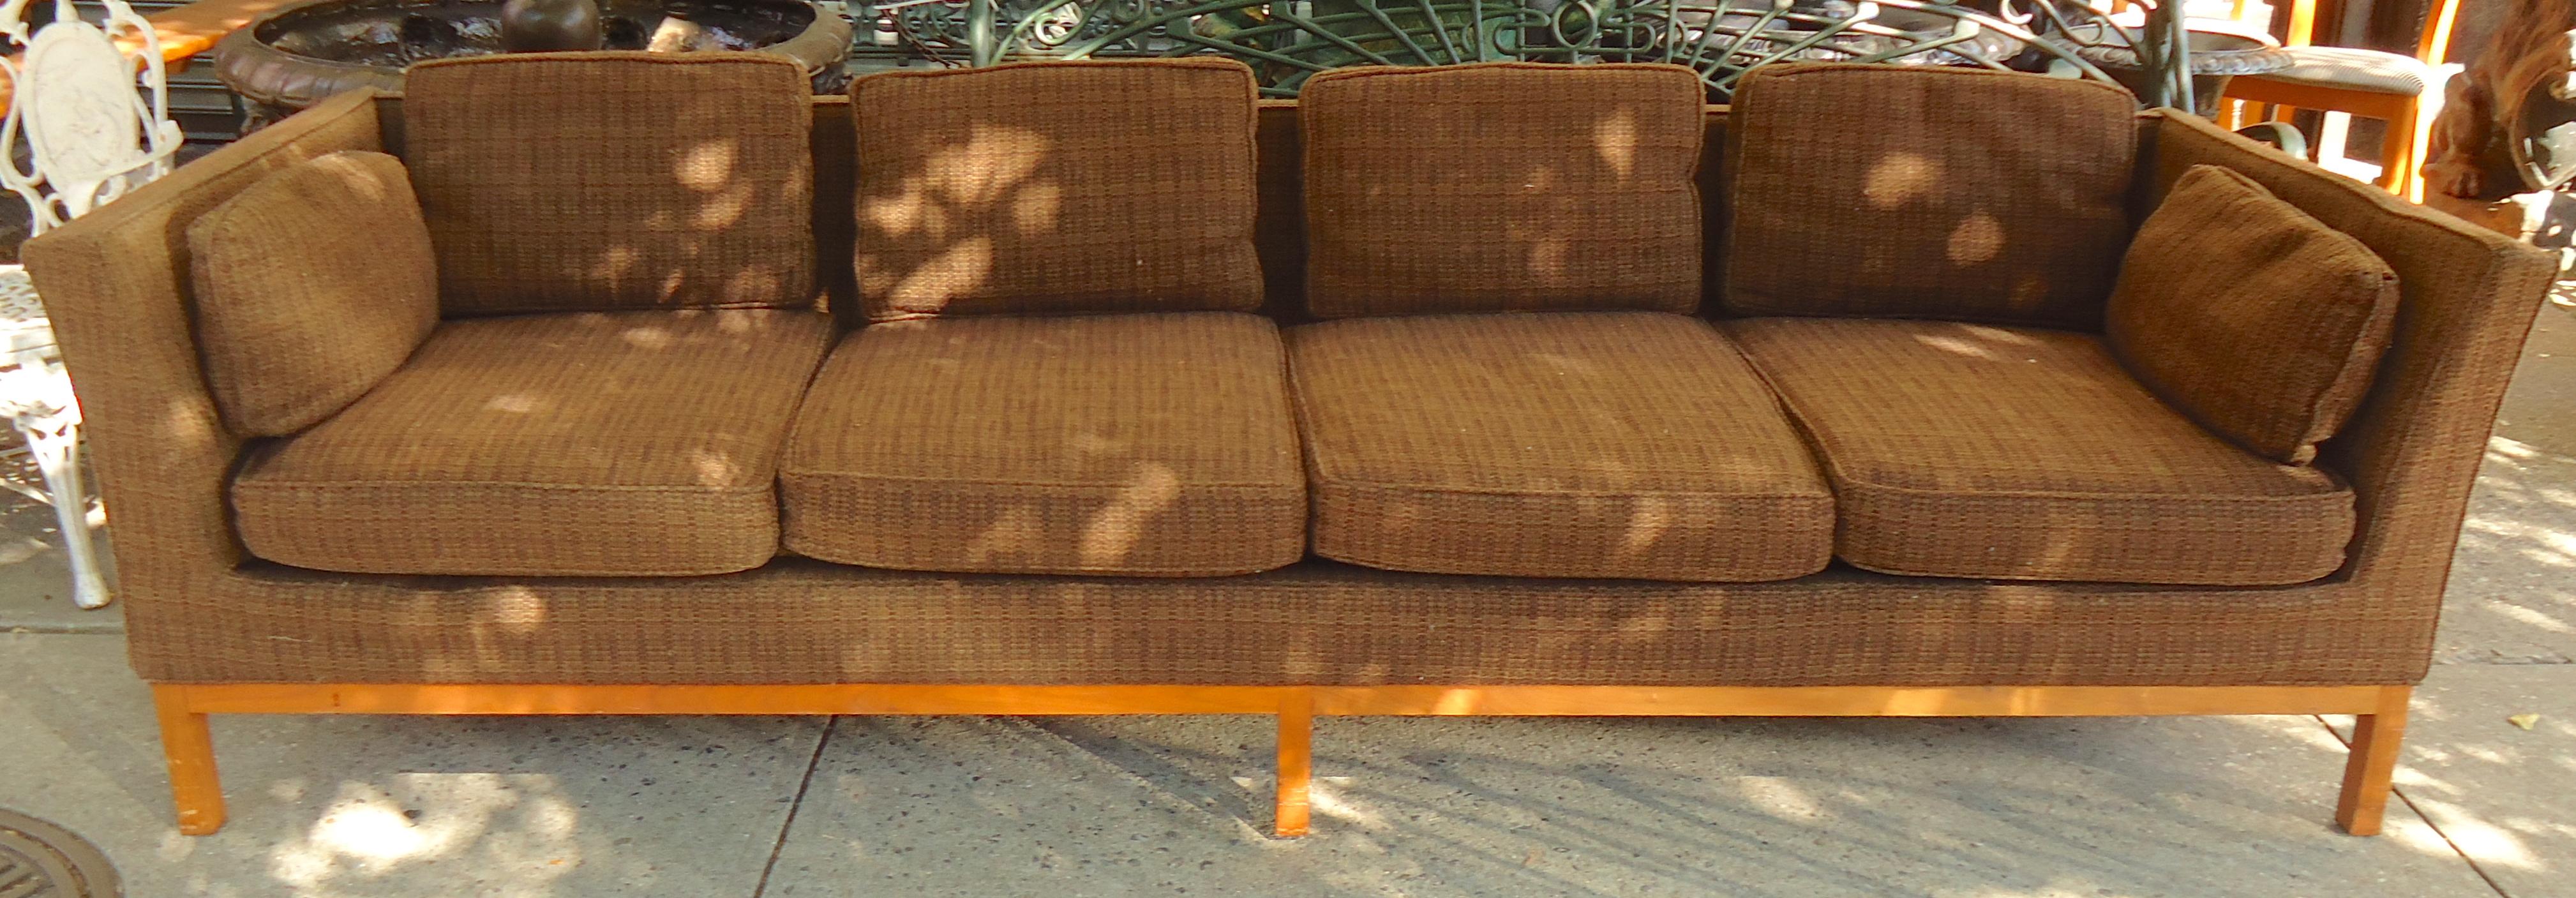 Four seat midcentury sofa with wood base. Simple and elegant design.
(Please confirm item location - NY or NJ - with dealer).
  